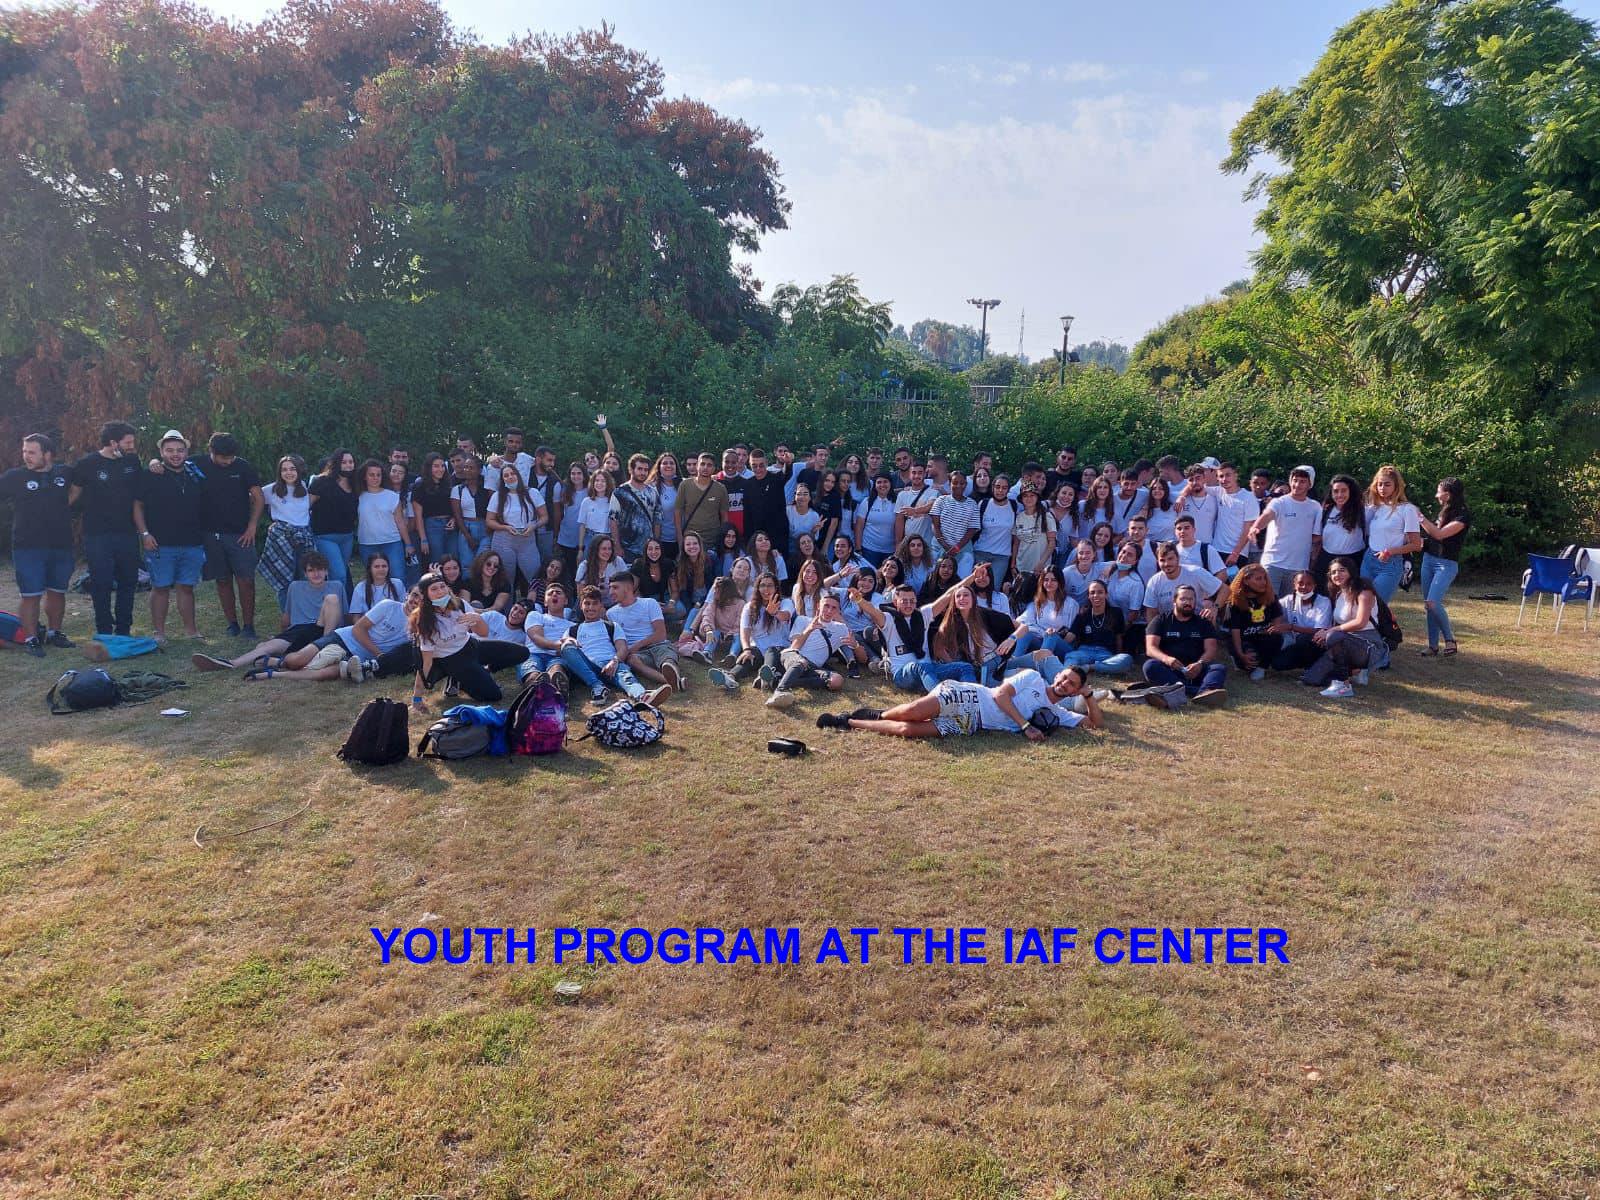 YOUTH PROGRAM AT THE IAF CENTER